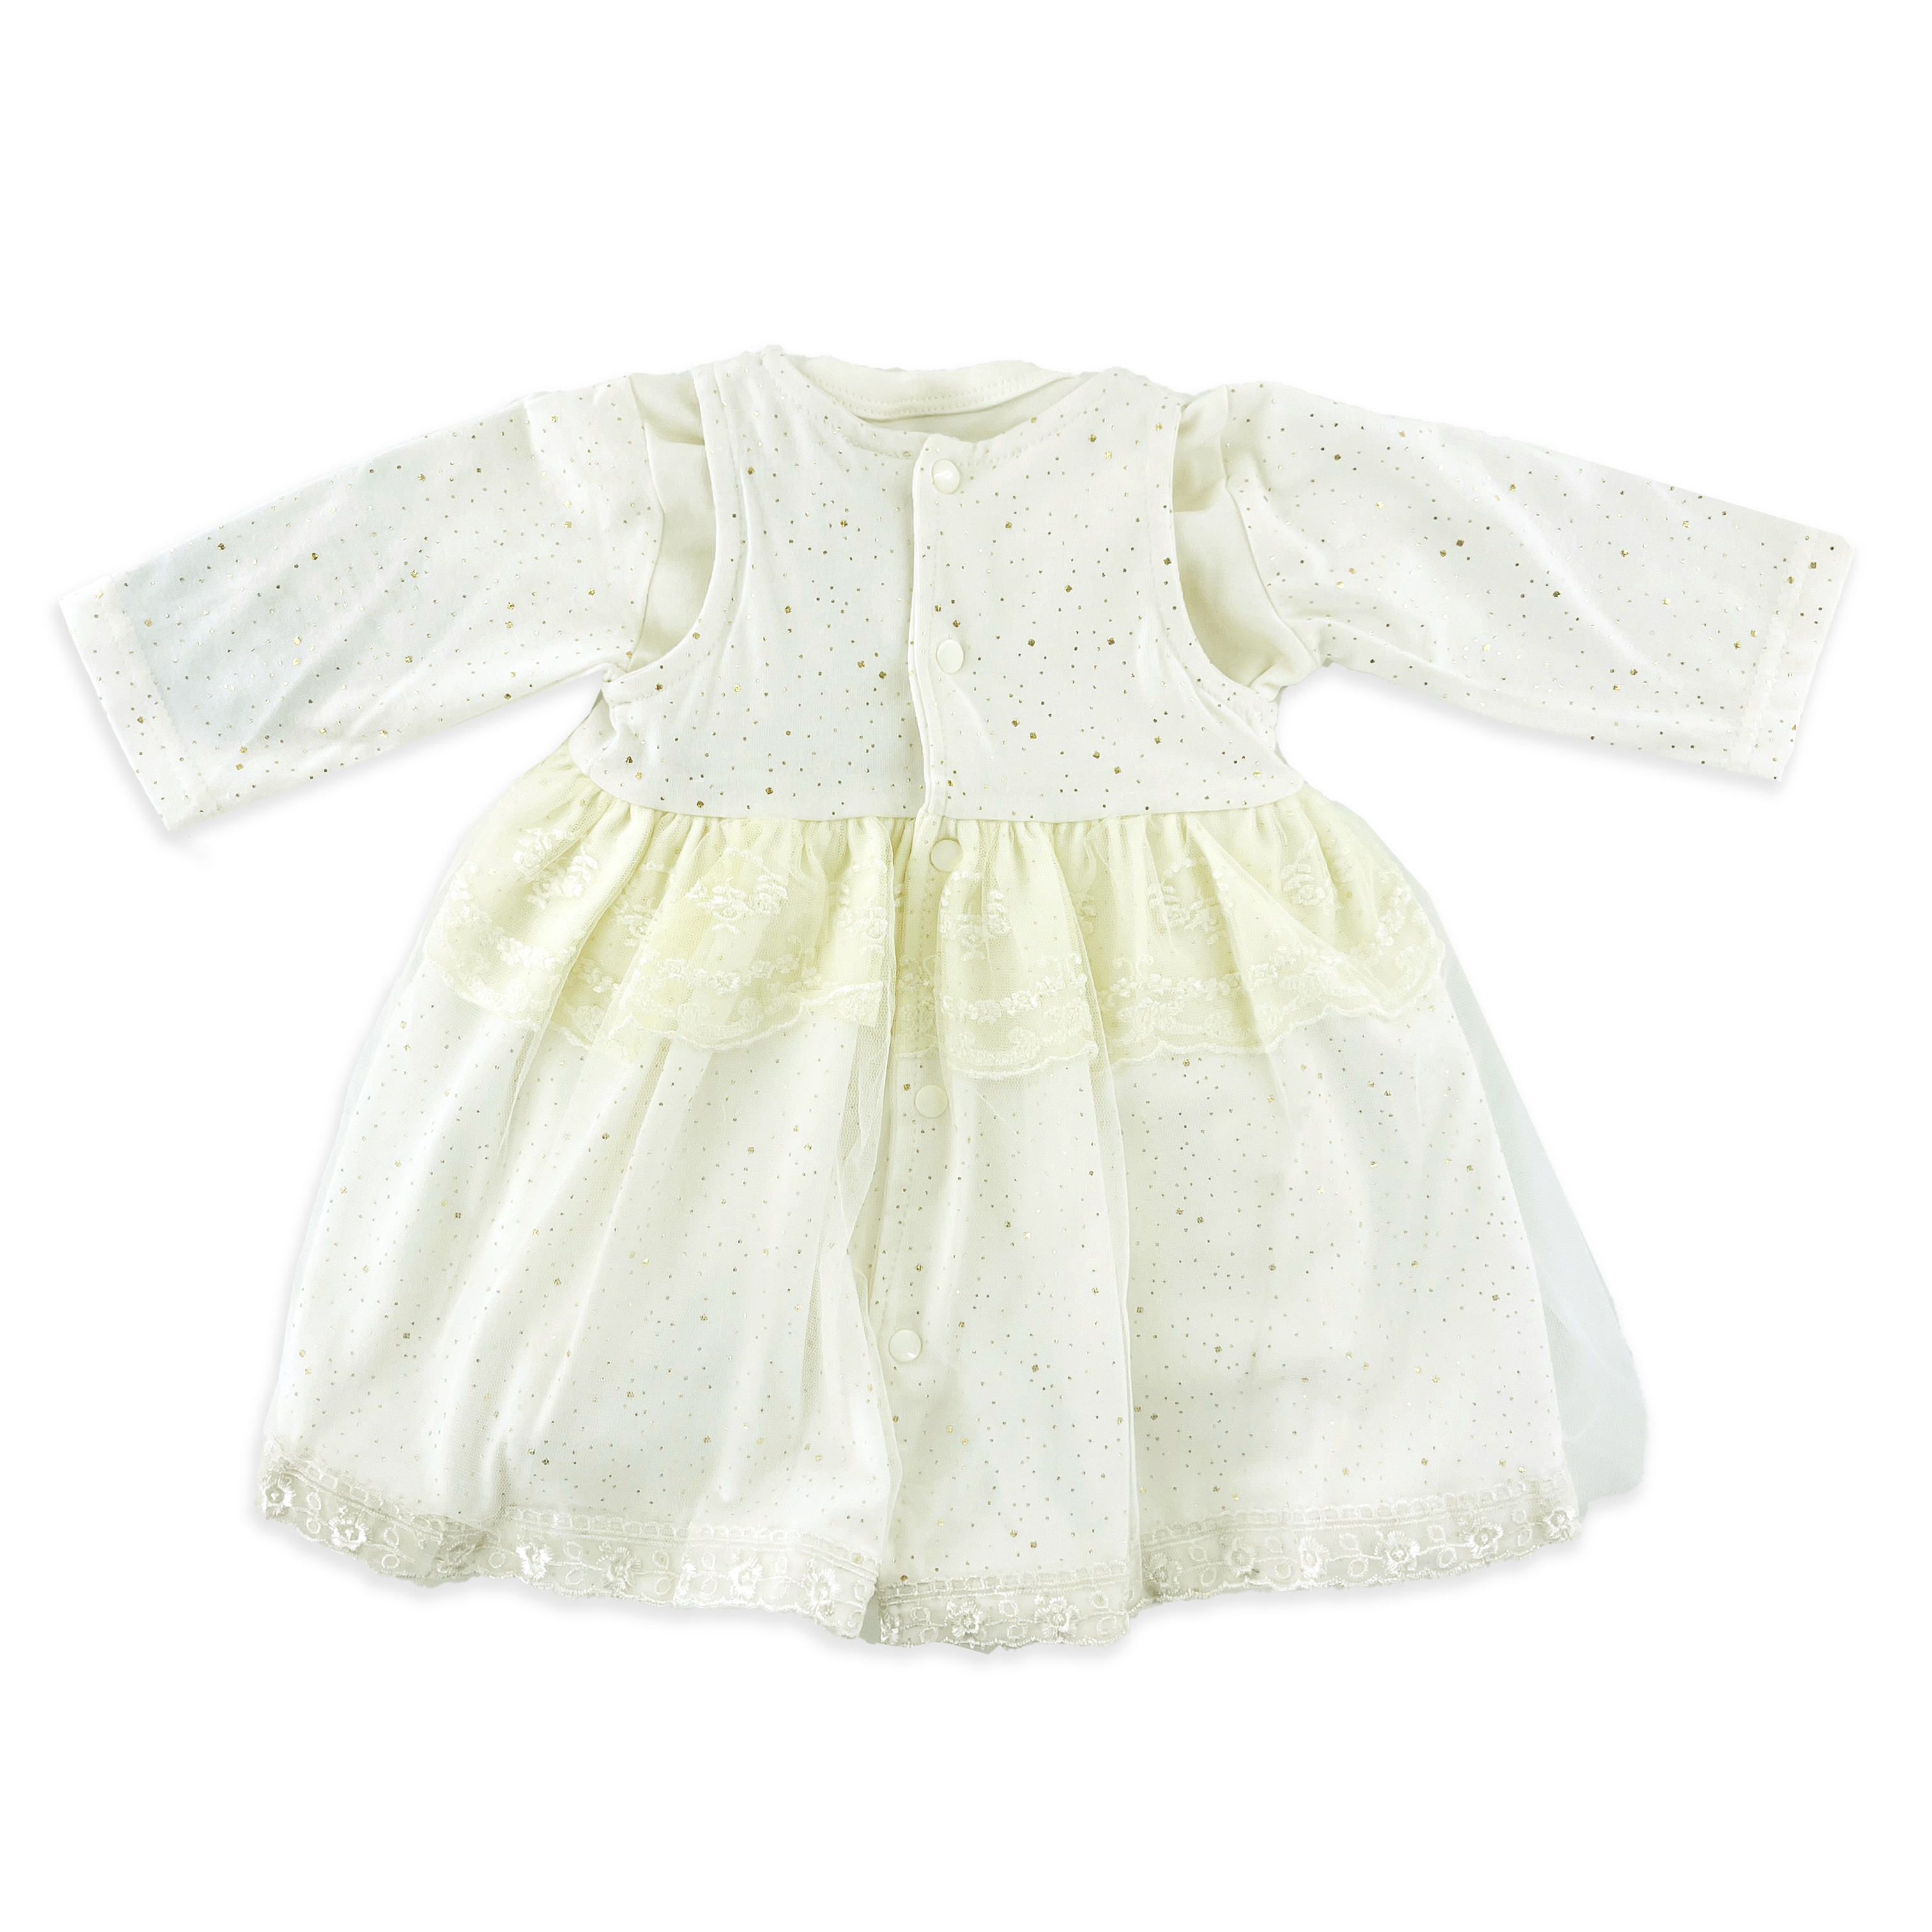 Faisionable Baby Girl full Sleeve  Frock 2 Psc